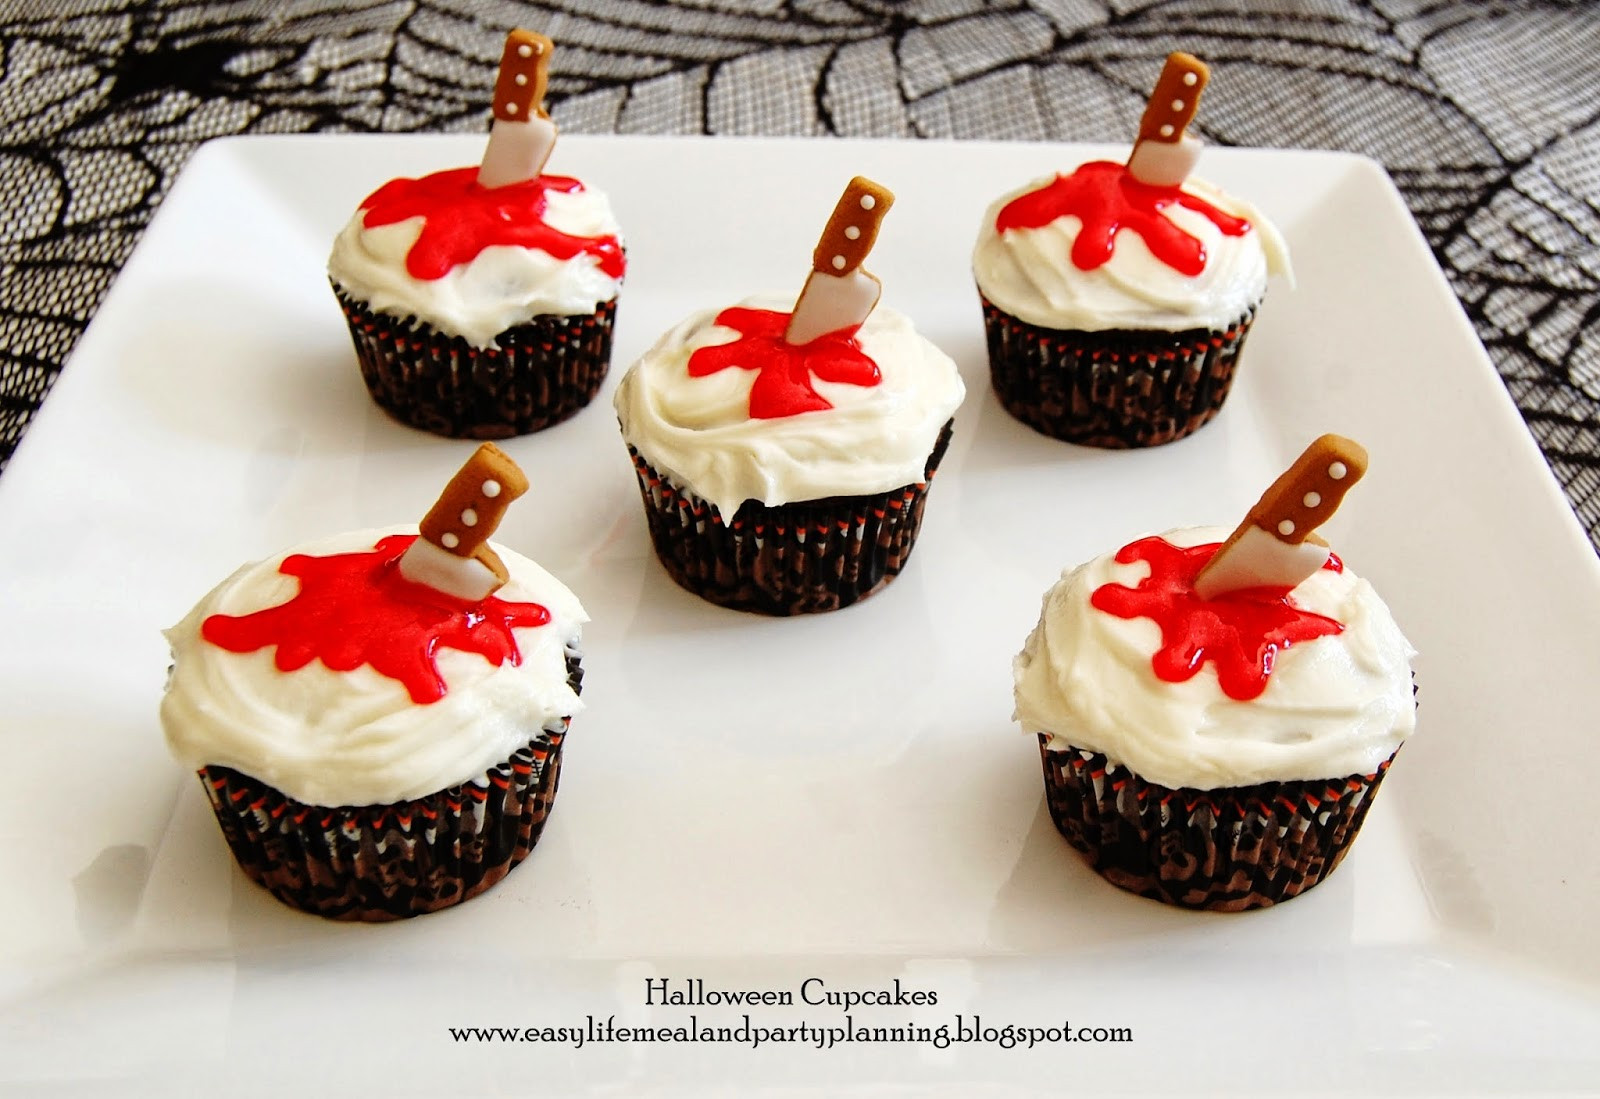 Cupcakes For Halloween
 Easy Life Meal and Party Planning October 2013